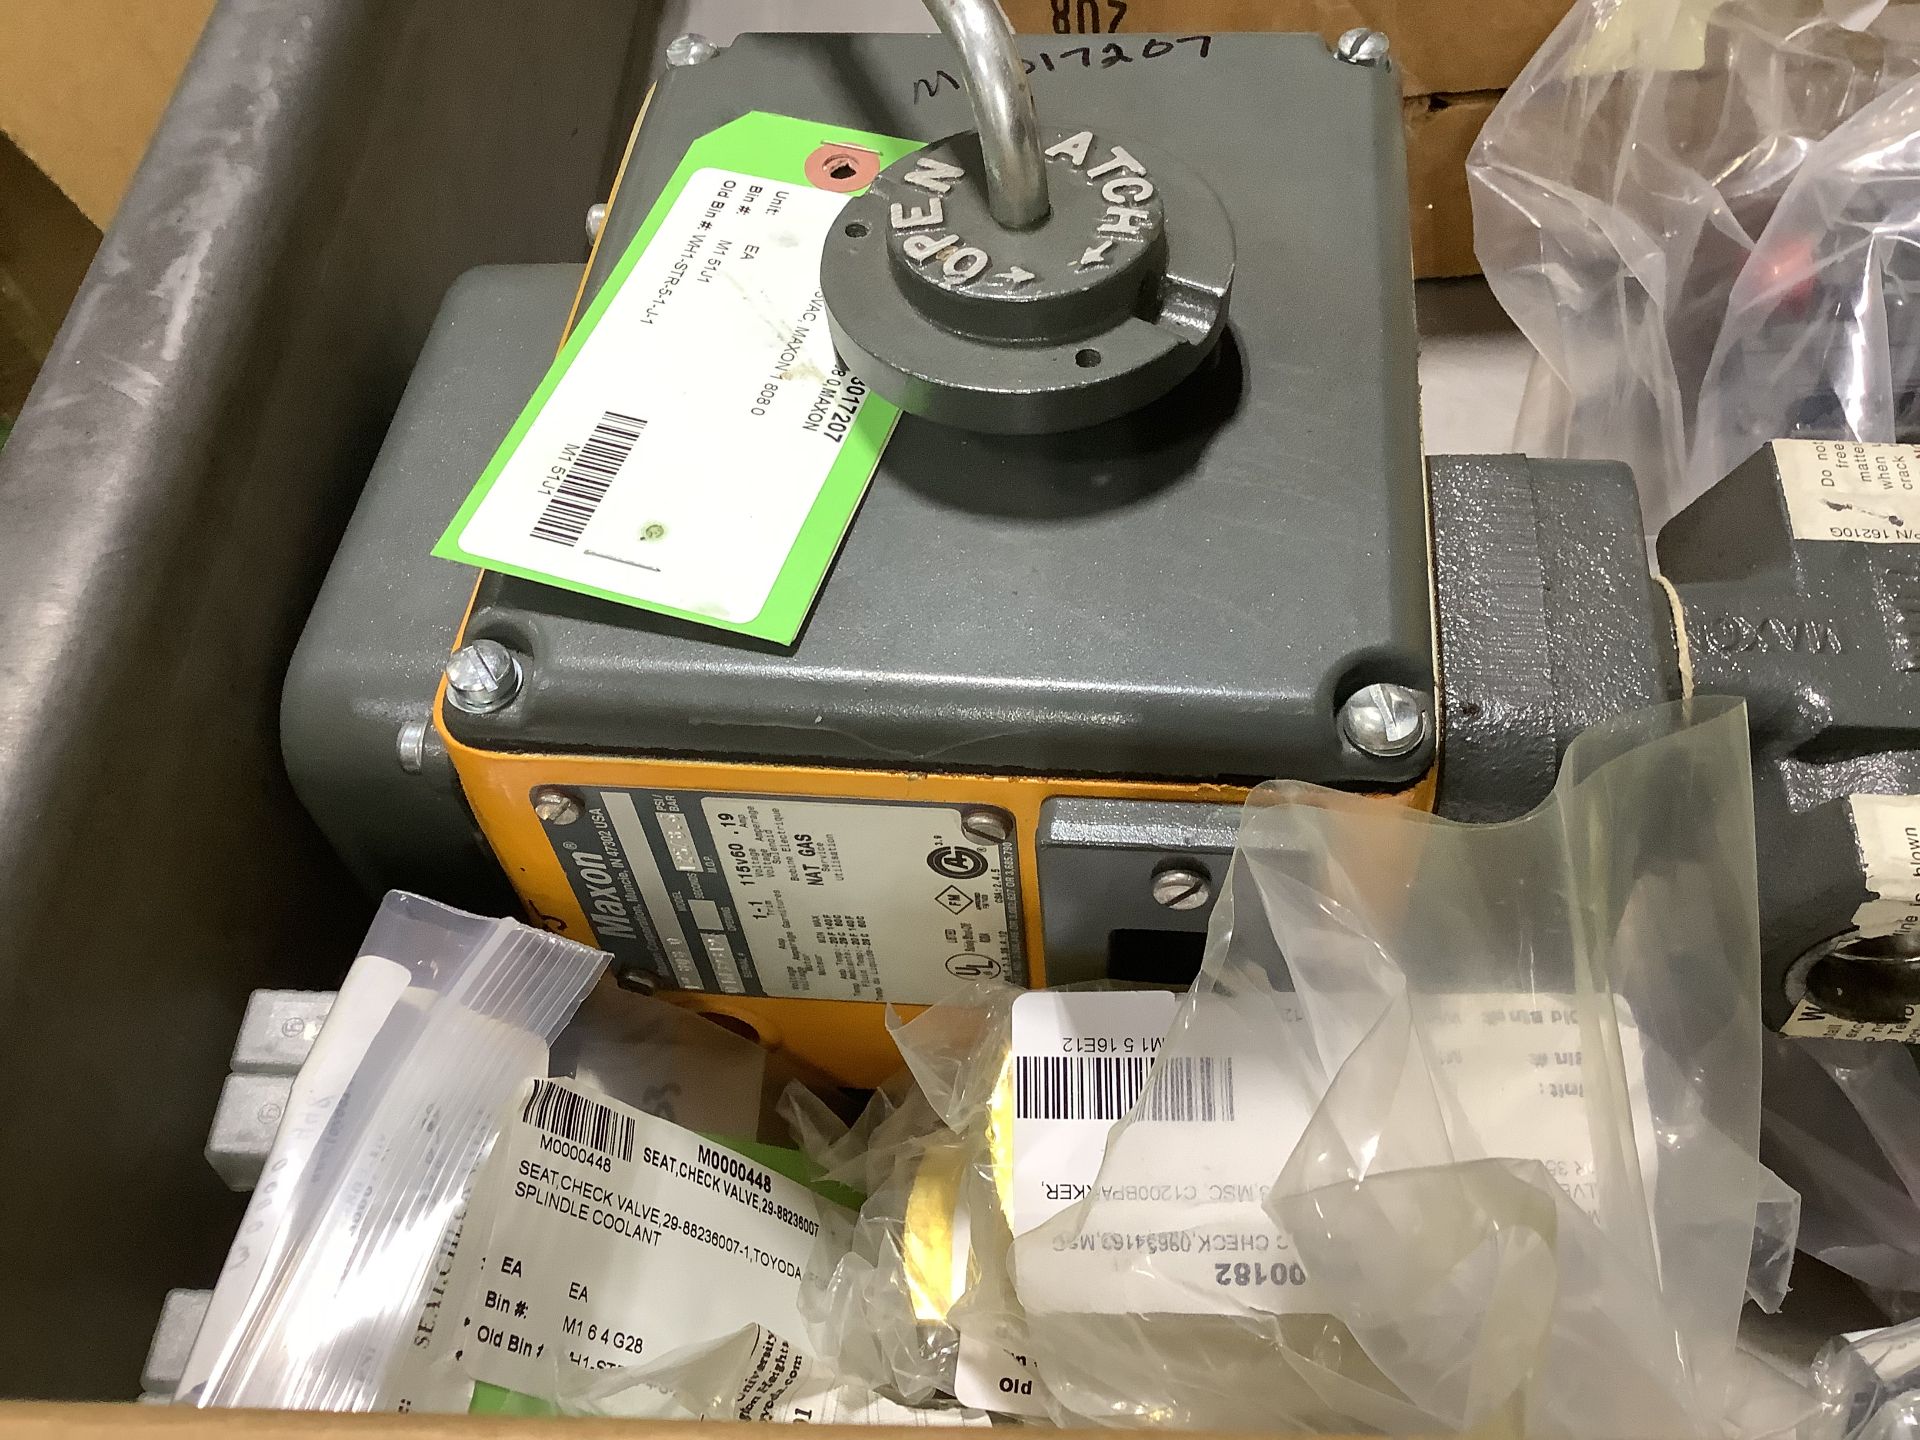 Lot of NEW Valves: Asco, CKD, Continental, Parker Hannifin, Vickers, and MORE - list in Description - Image 9 of 9